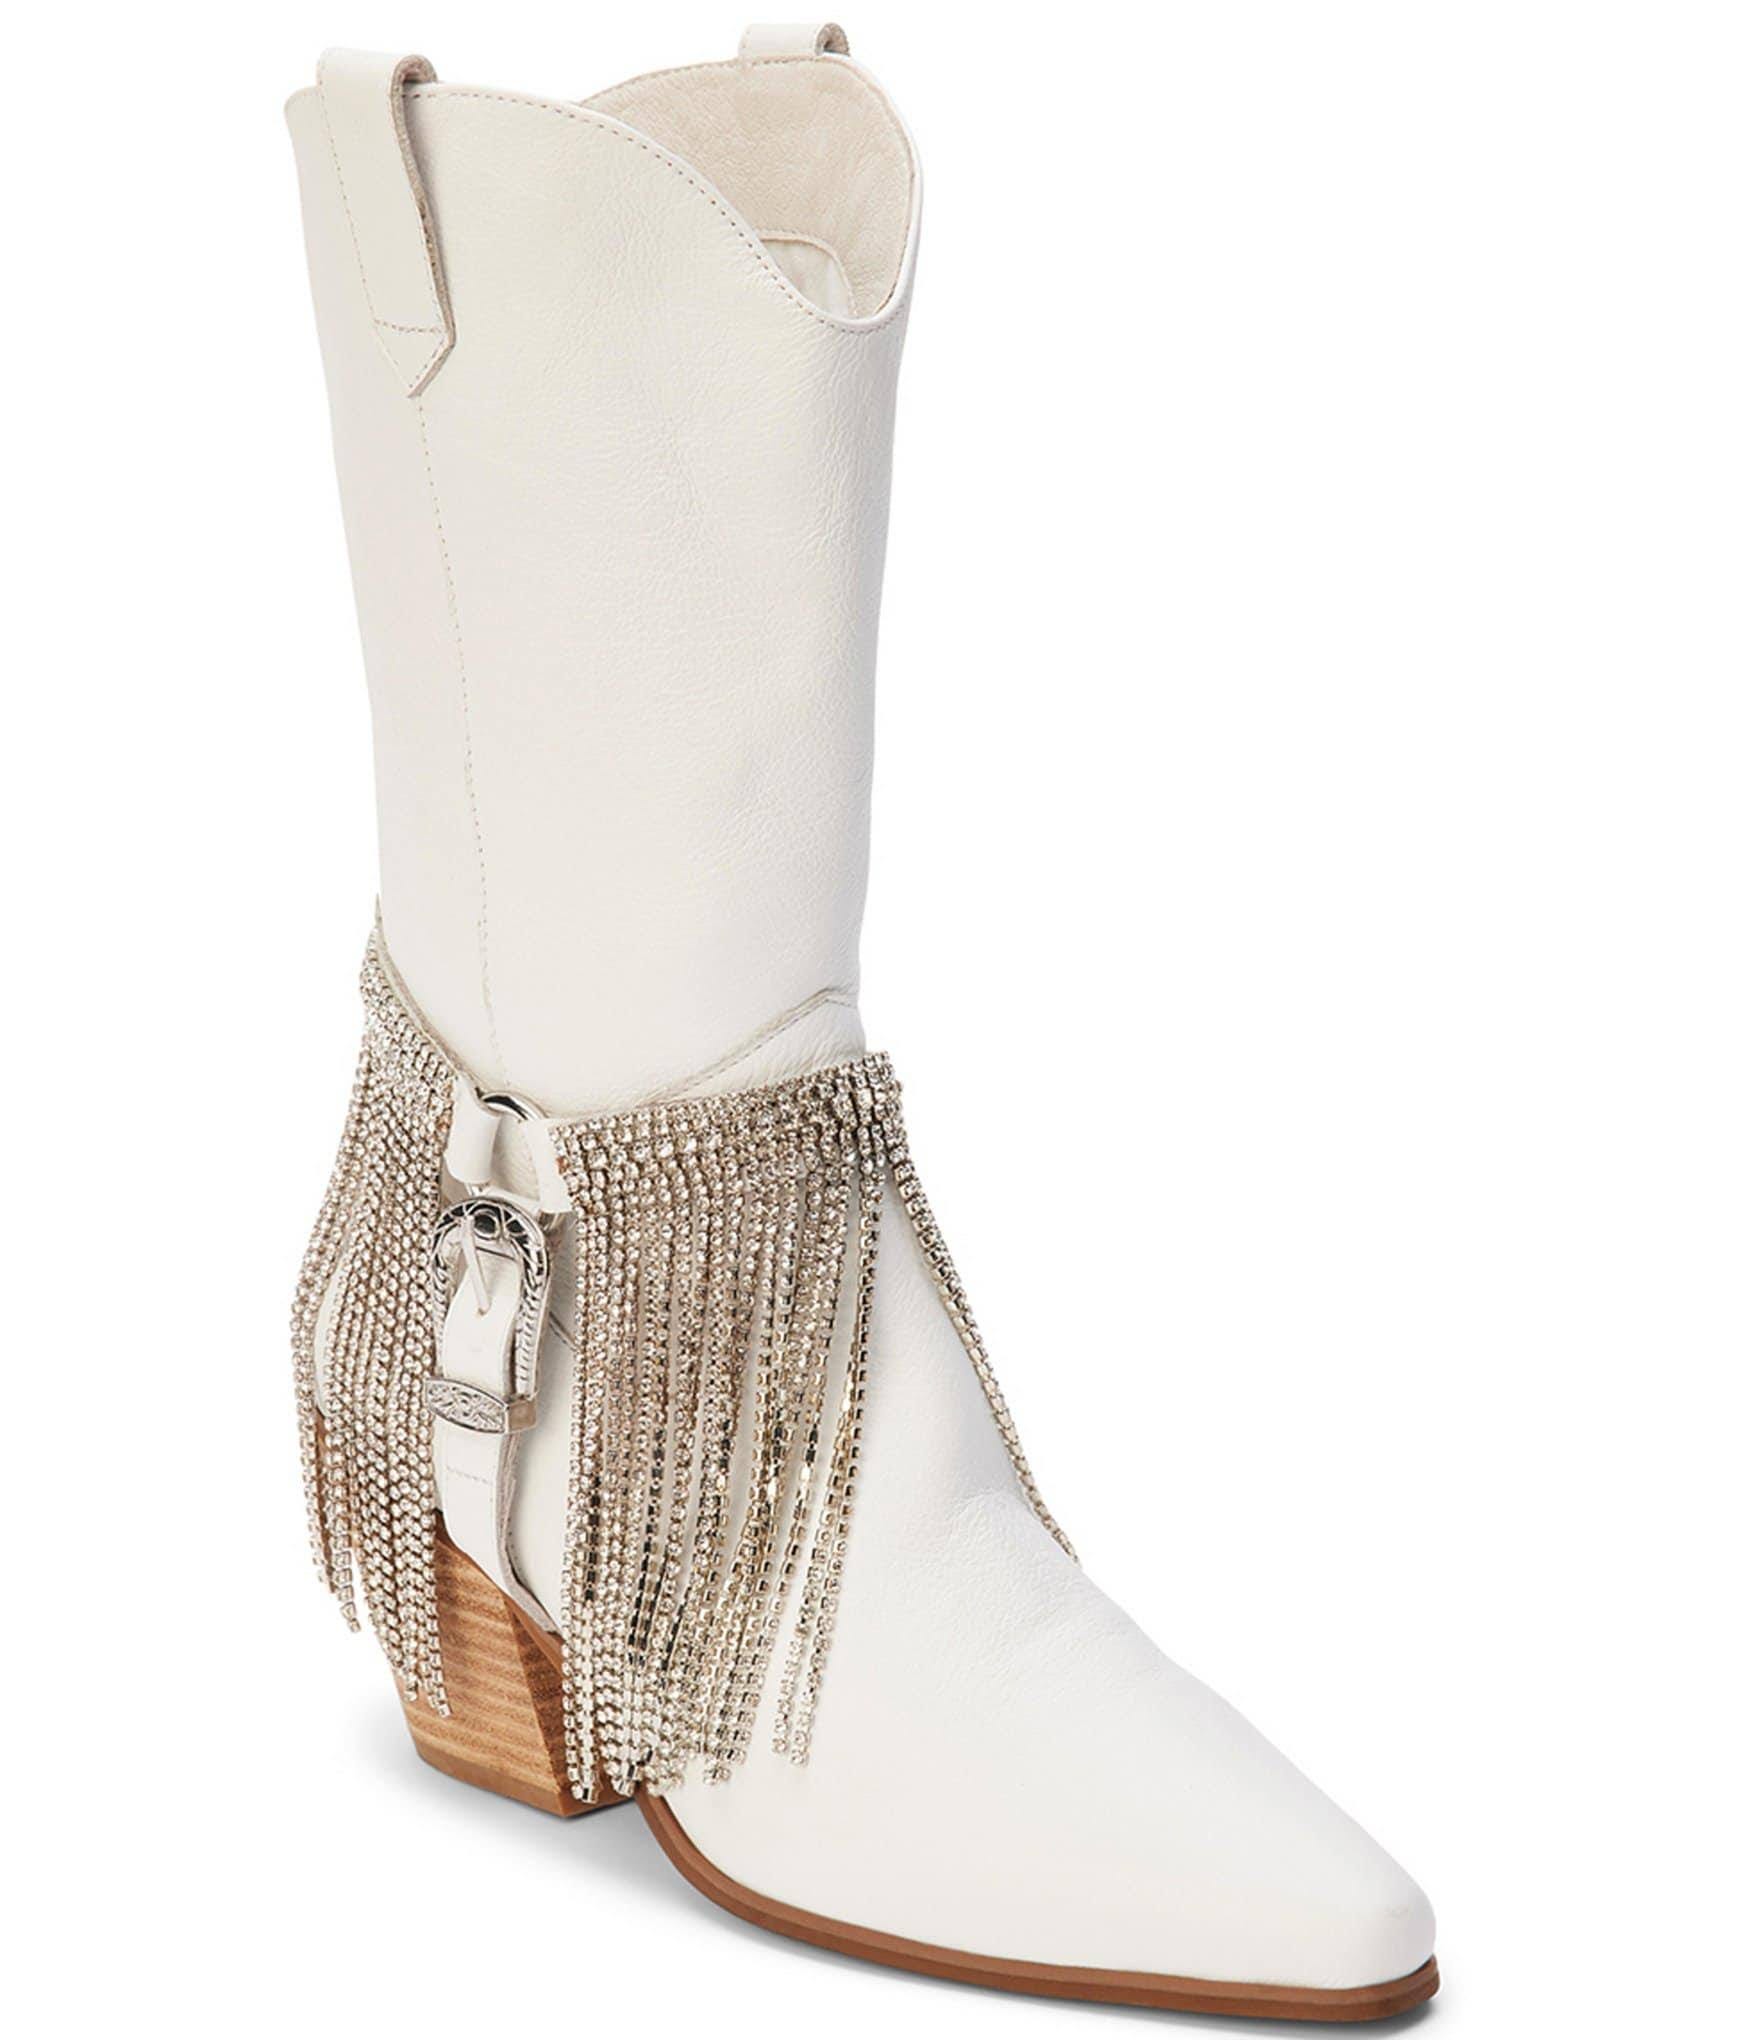 Elegant White Leather Dolly Booties with 2.5